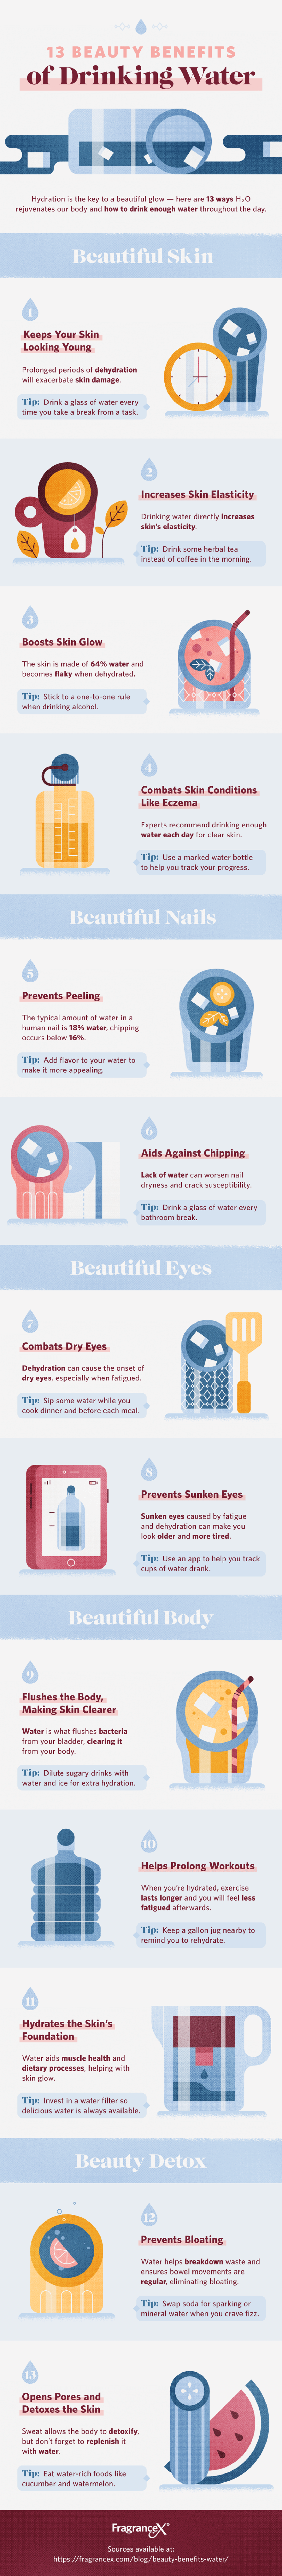 13-beauty-benefits-of-drinking-water-infographic